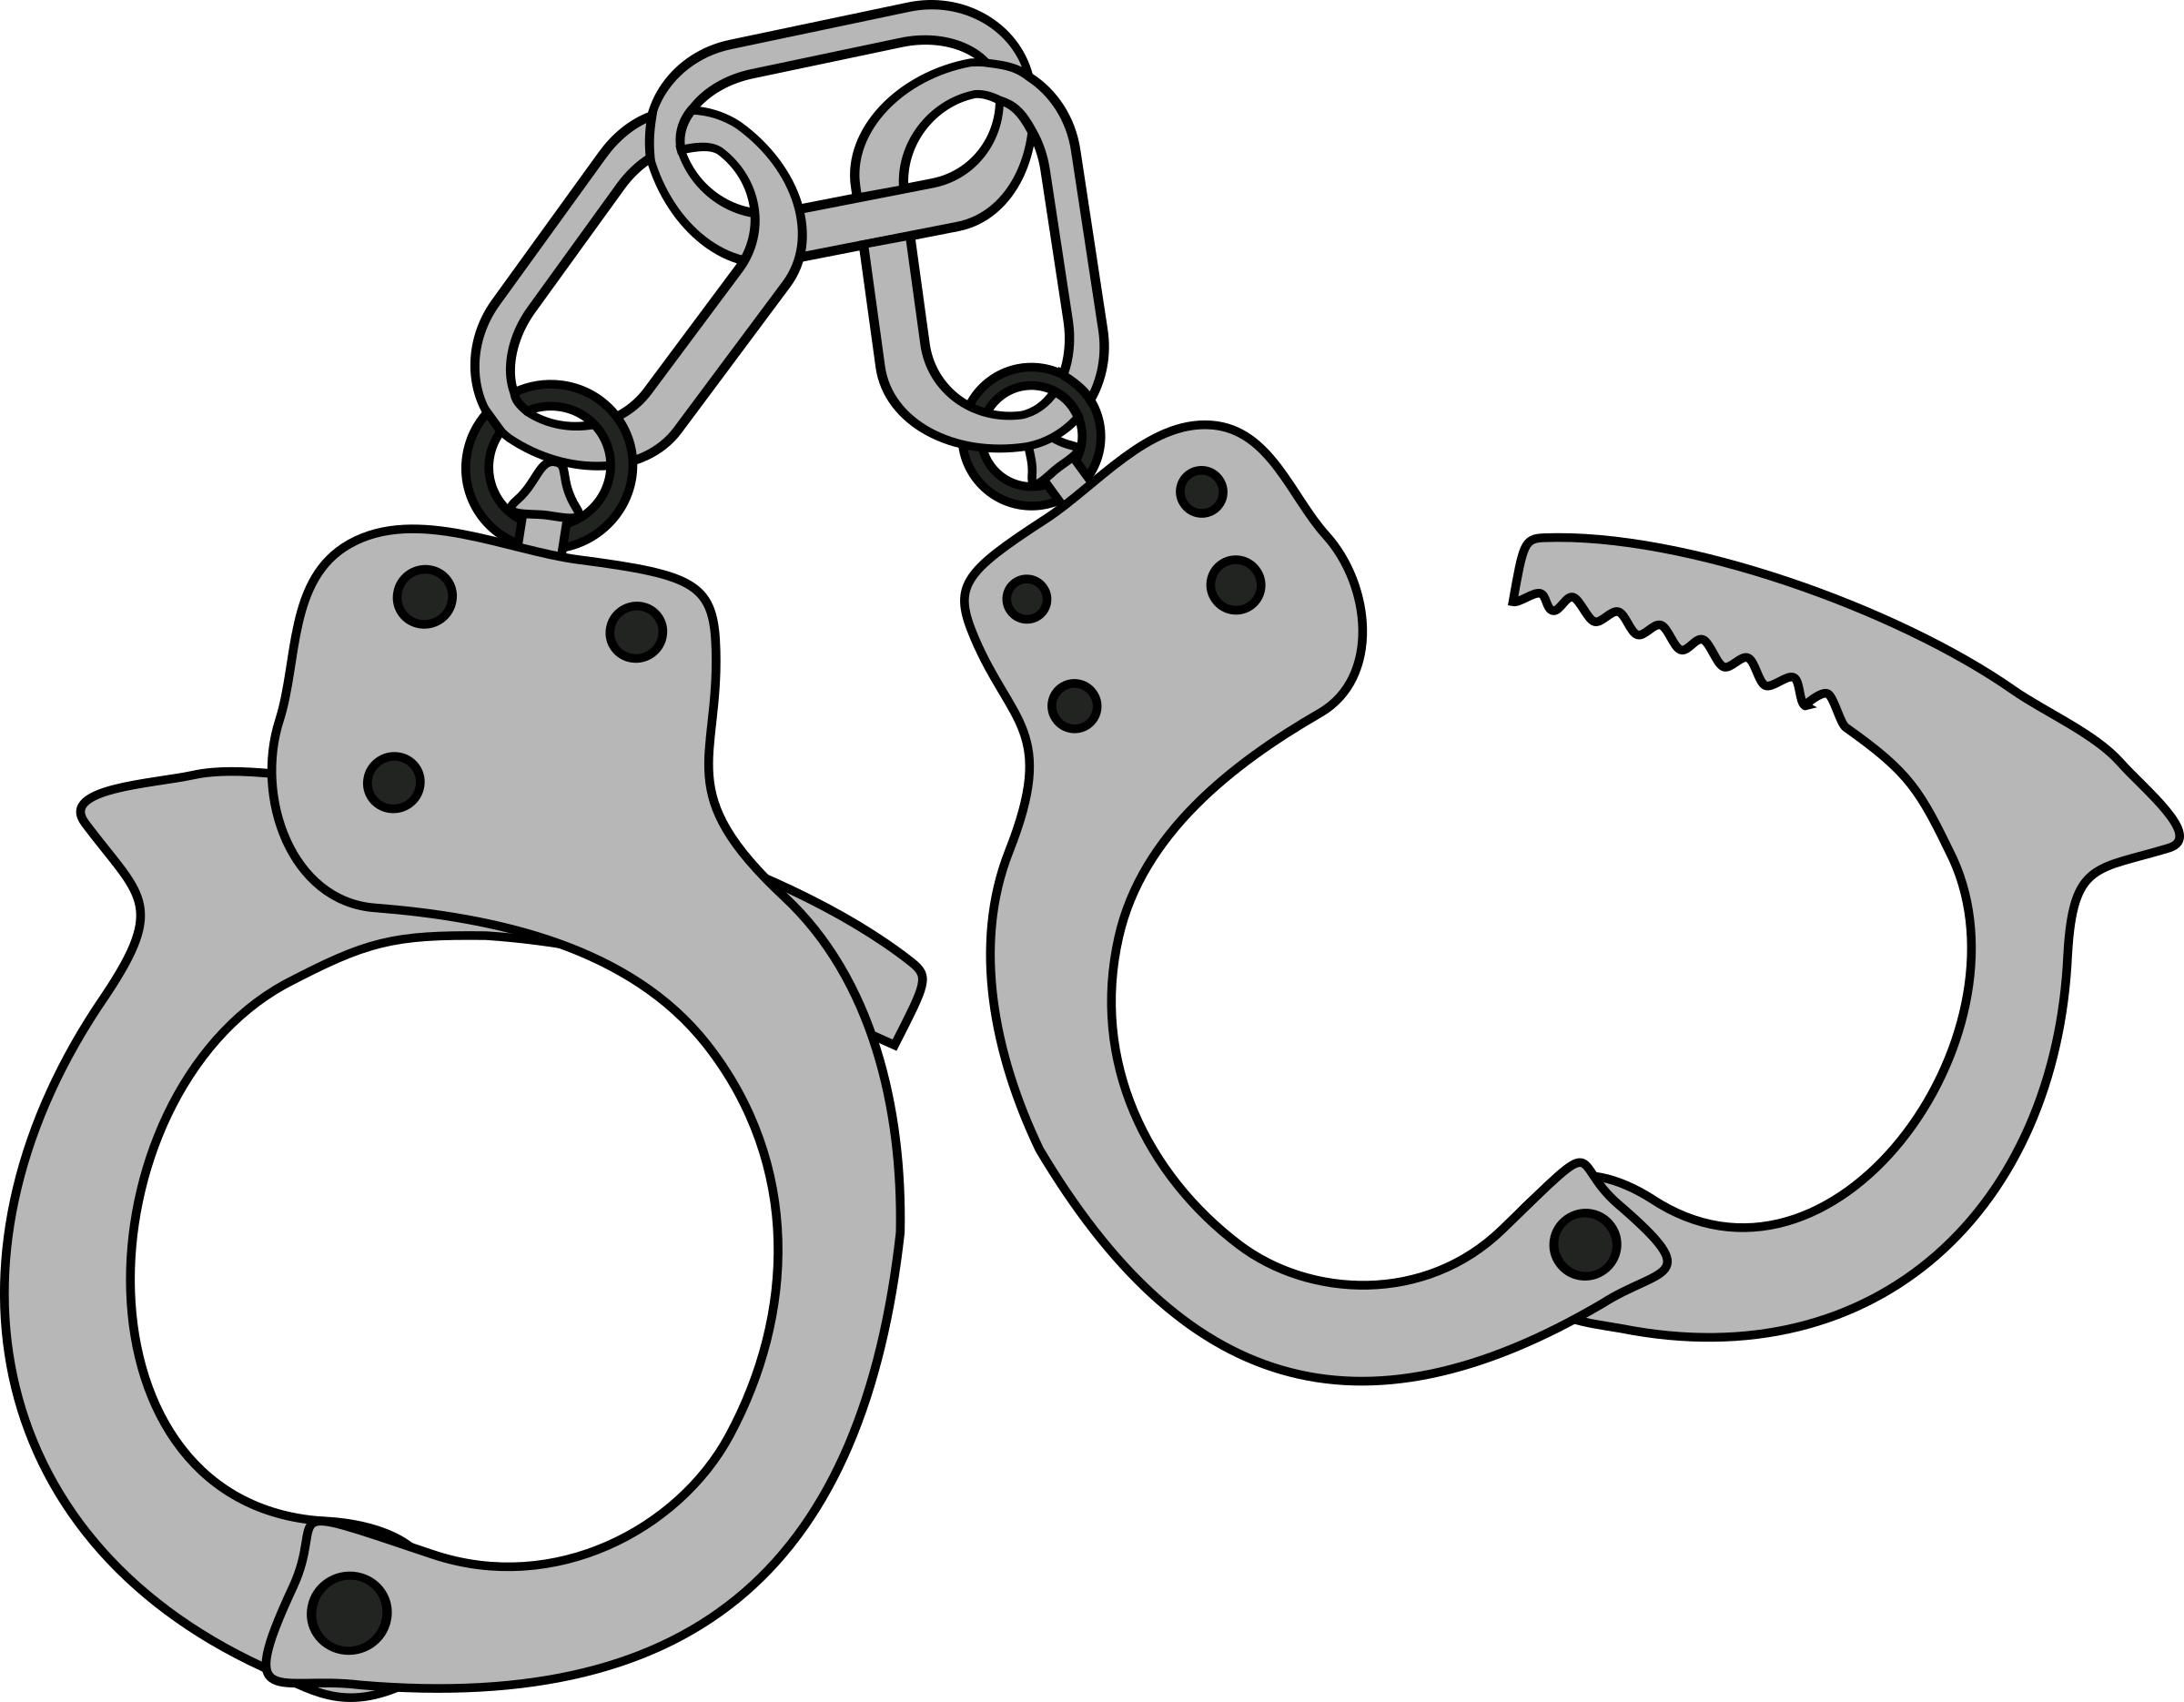 Handcuffs clipart thing.